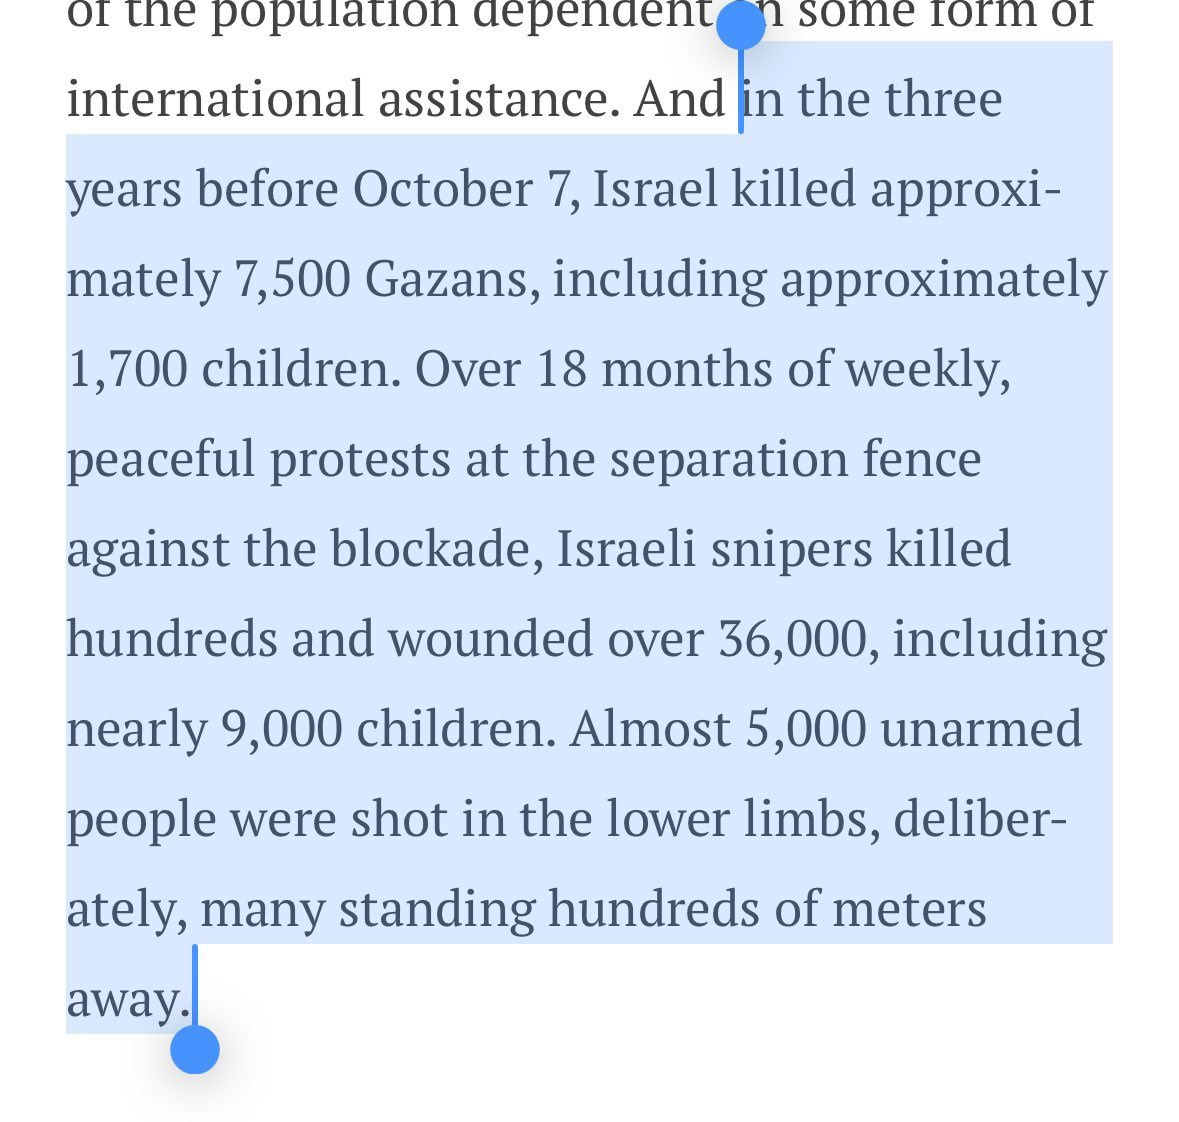 This is why Israel needed to make up atrocity propaganda about infants strung up on clothes lines and 40 beheaded babies that our president lied about to our faces. It’s why they paid millions for a superbowl ad while they incinerated and tore apart children with bombs in Rafah.